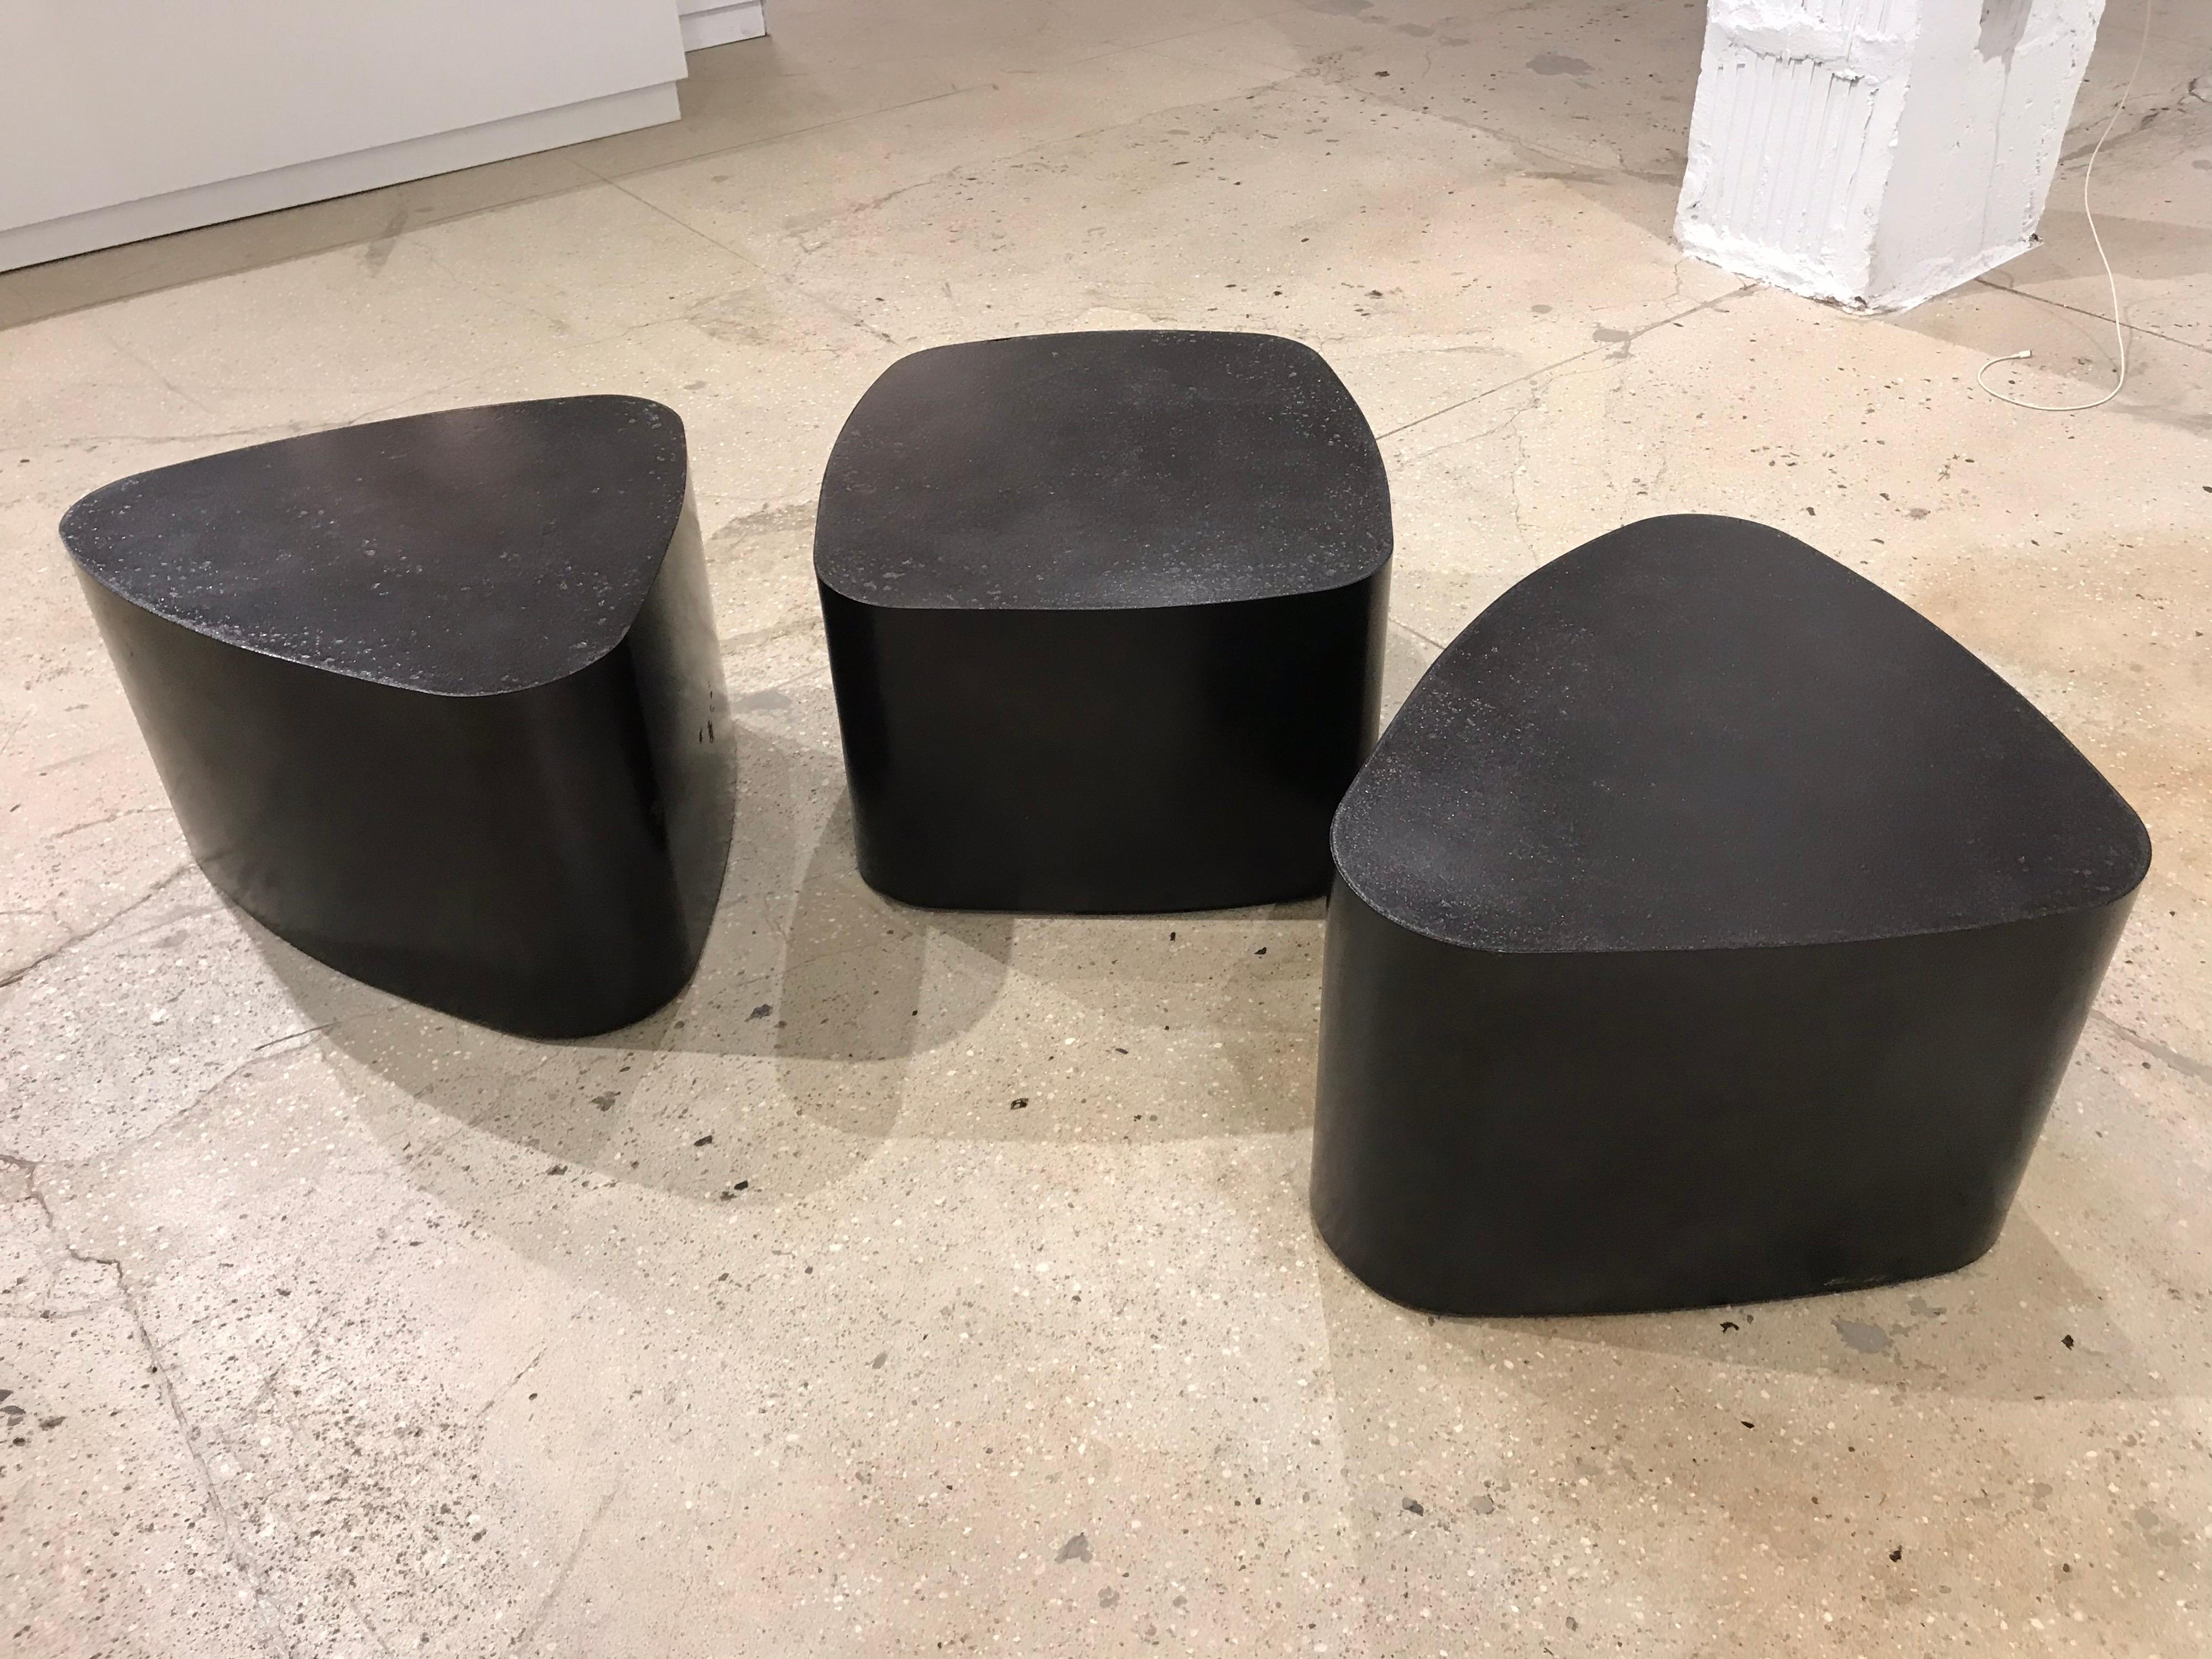 A set of 3 coffee or side tables custom made by French designer ,Stephane Ducatteu . The metal bases have a very dark bronze finish and the black tops are a custom stone composite. Signed.

One table is 12” H x 20 1/4” x 18.5” 2 table is 13” H x 22”